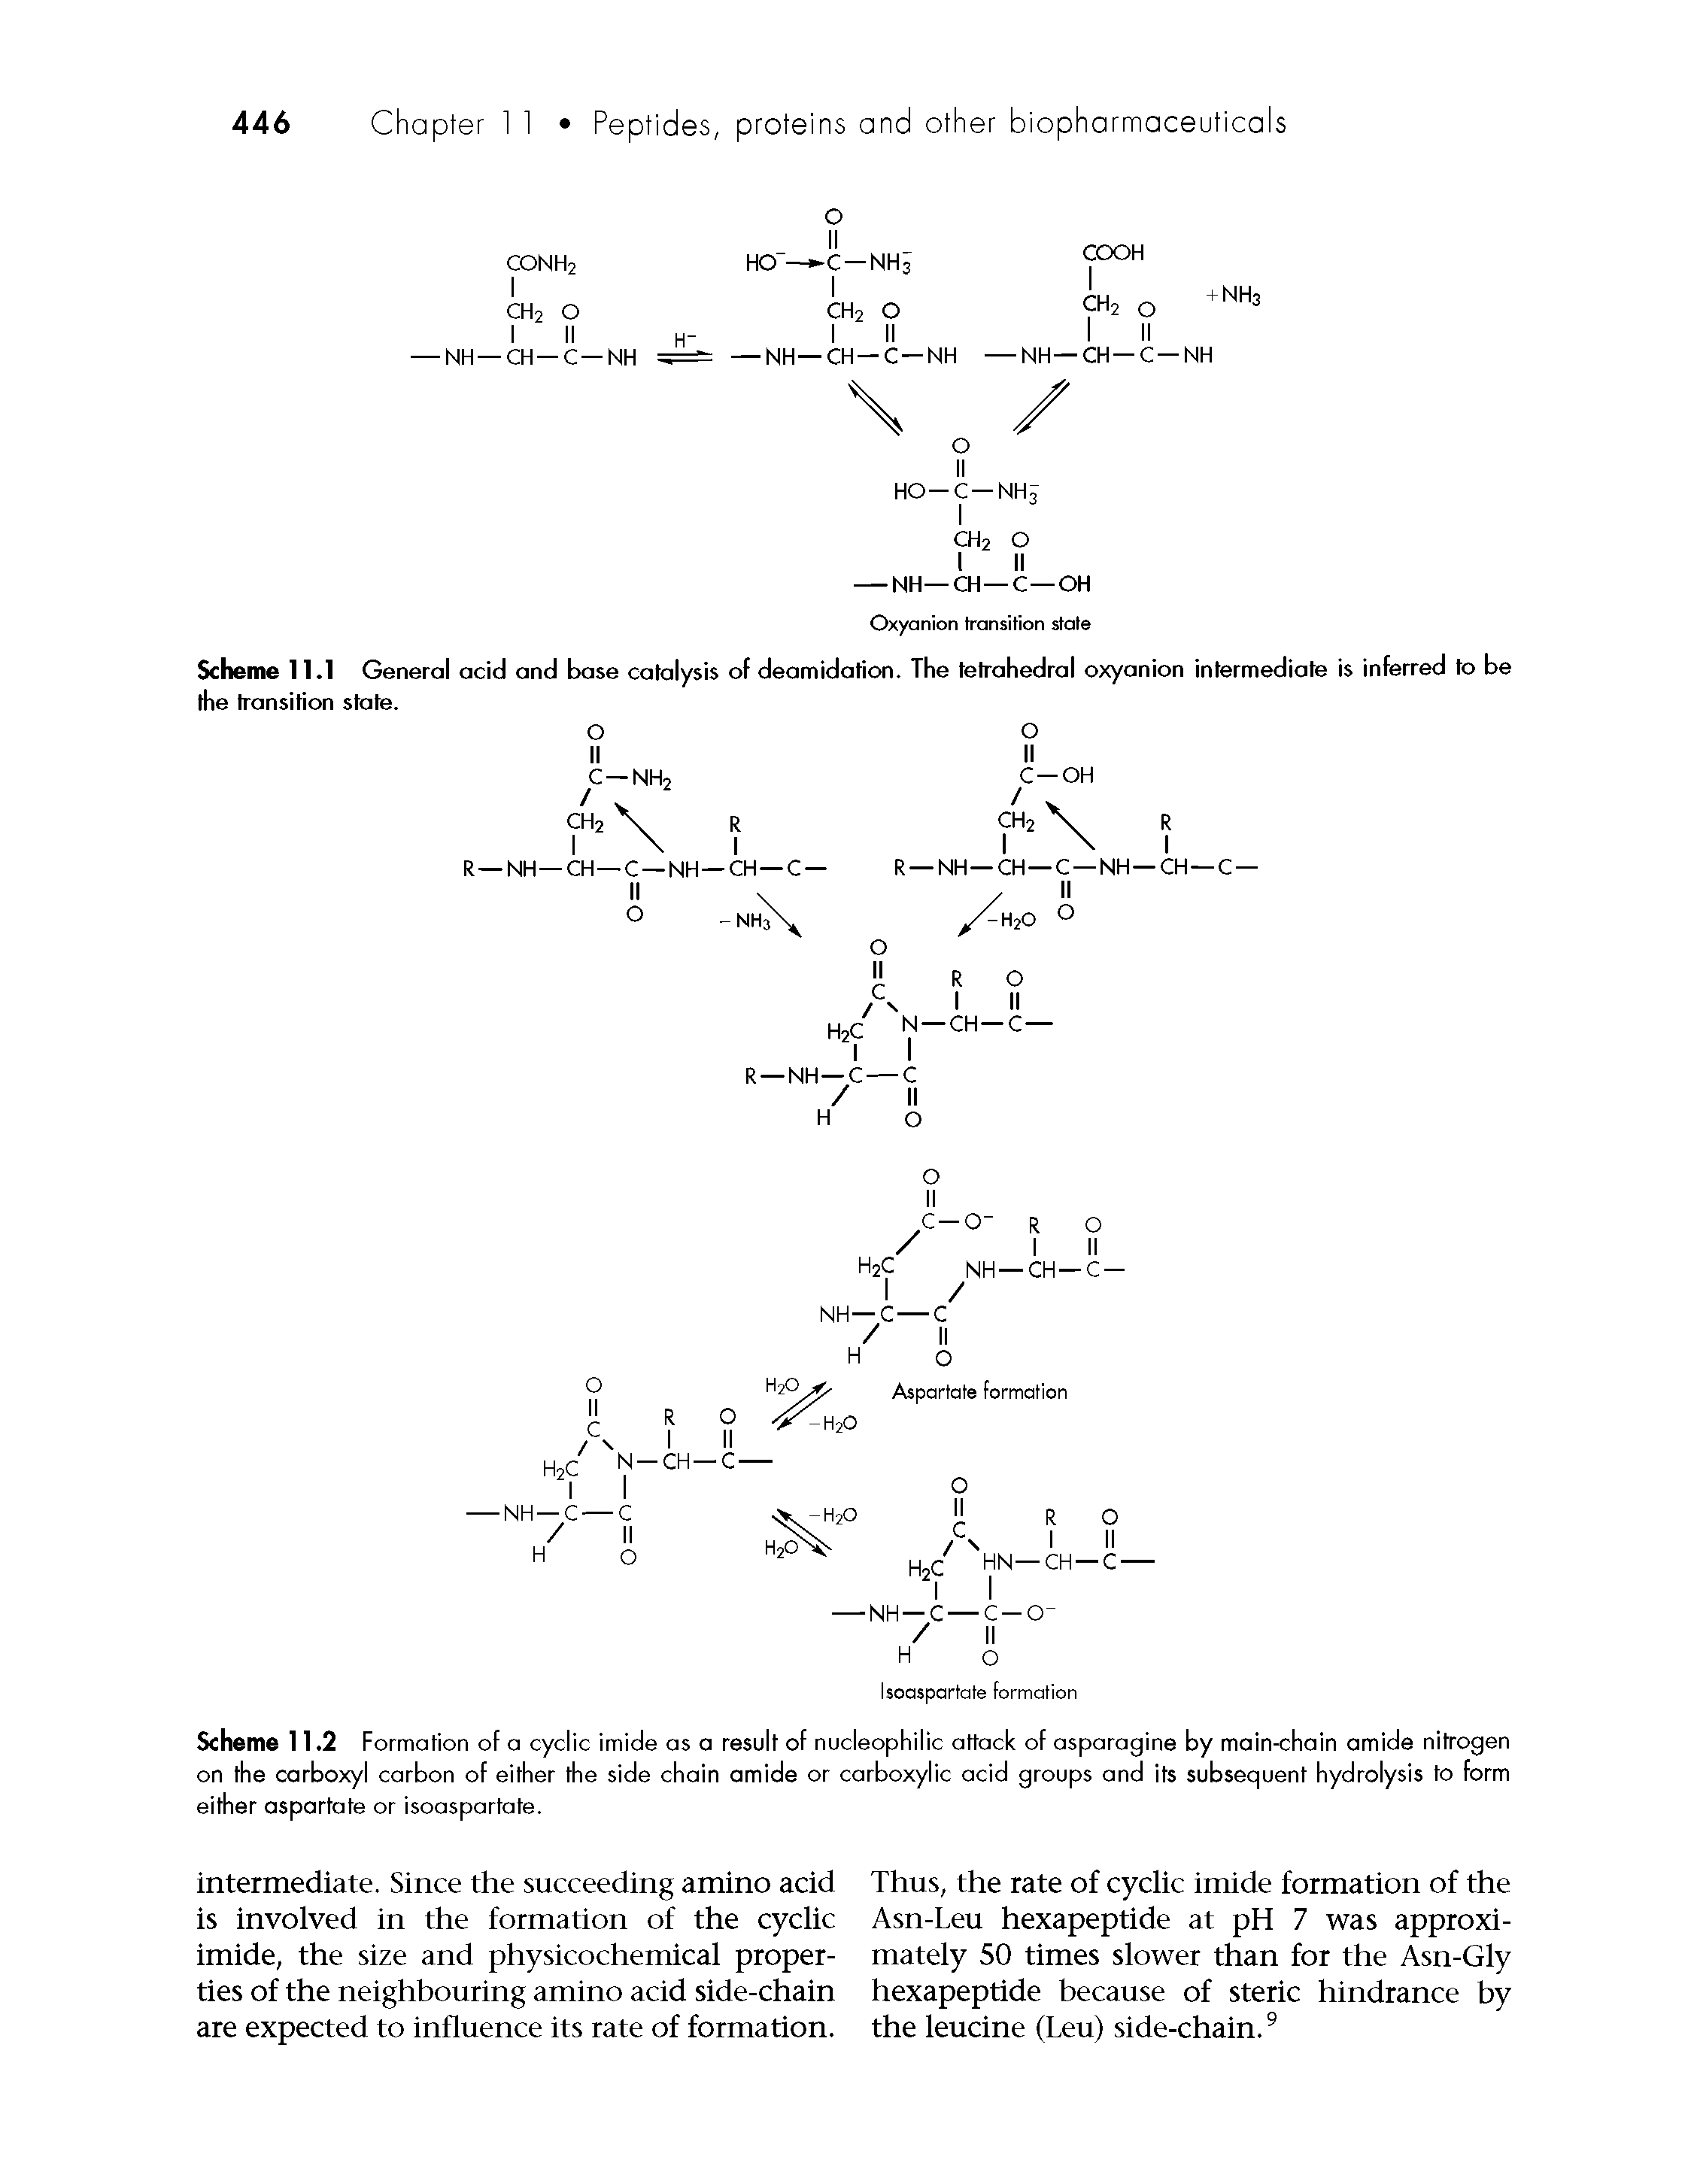 Scheme 11.1 General acid and base catalysis of deamidation. The tetrahedral oxyanion intermediate is inferred to be the transition state.